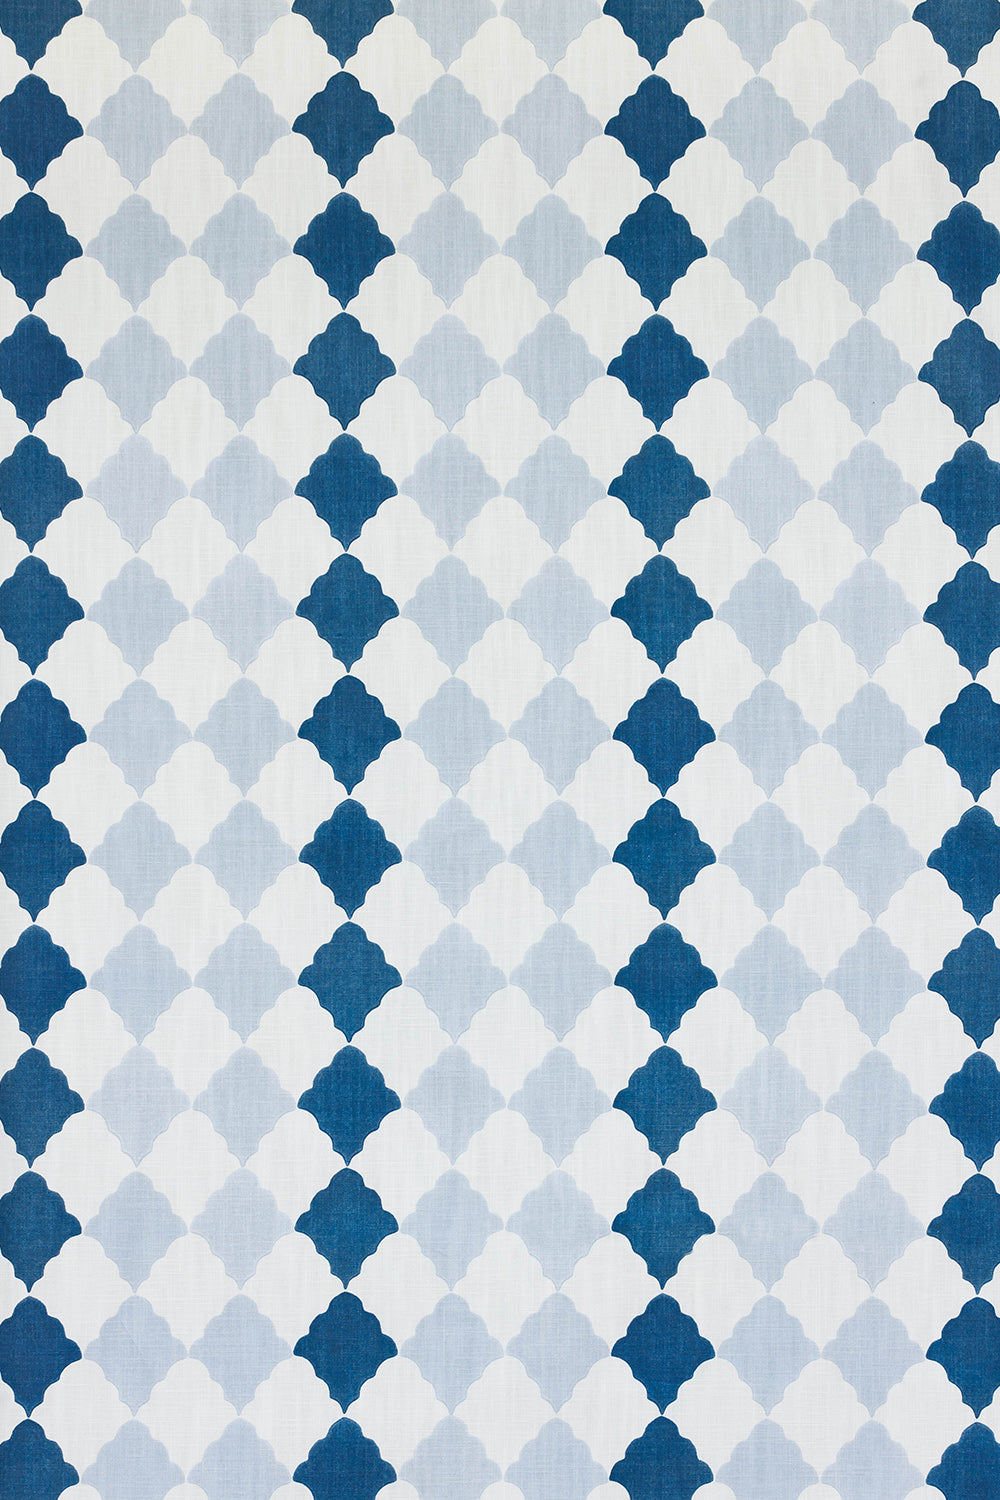 Quilted Harlequin Fabric